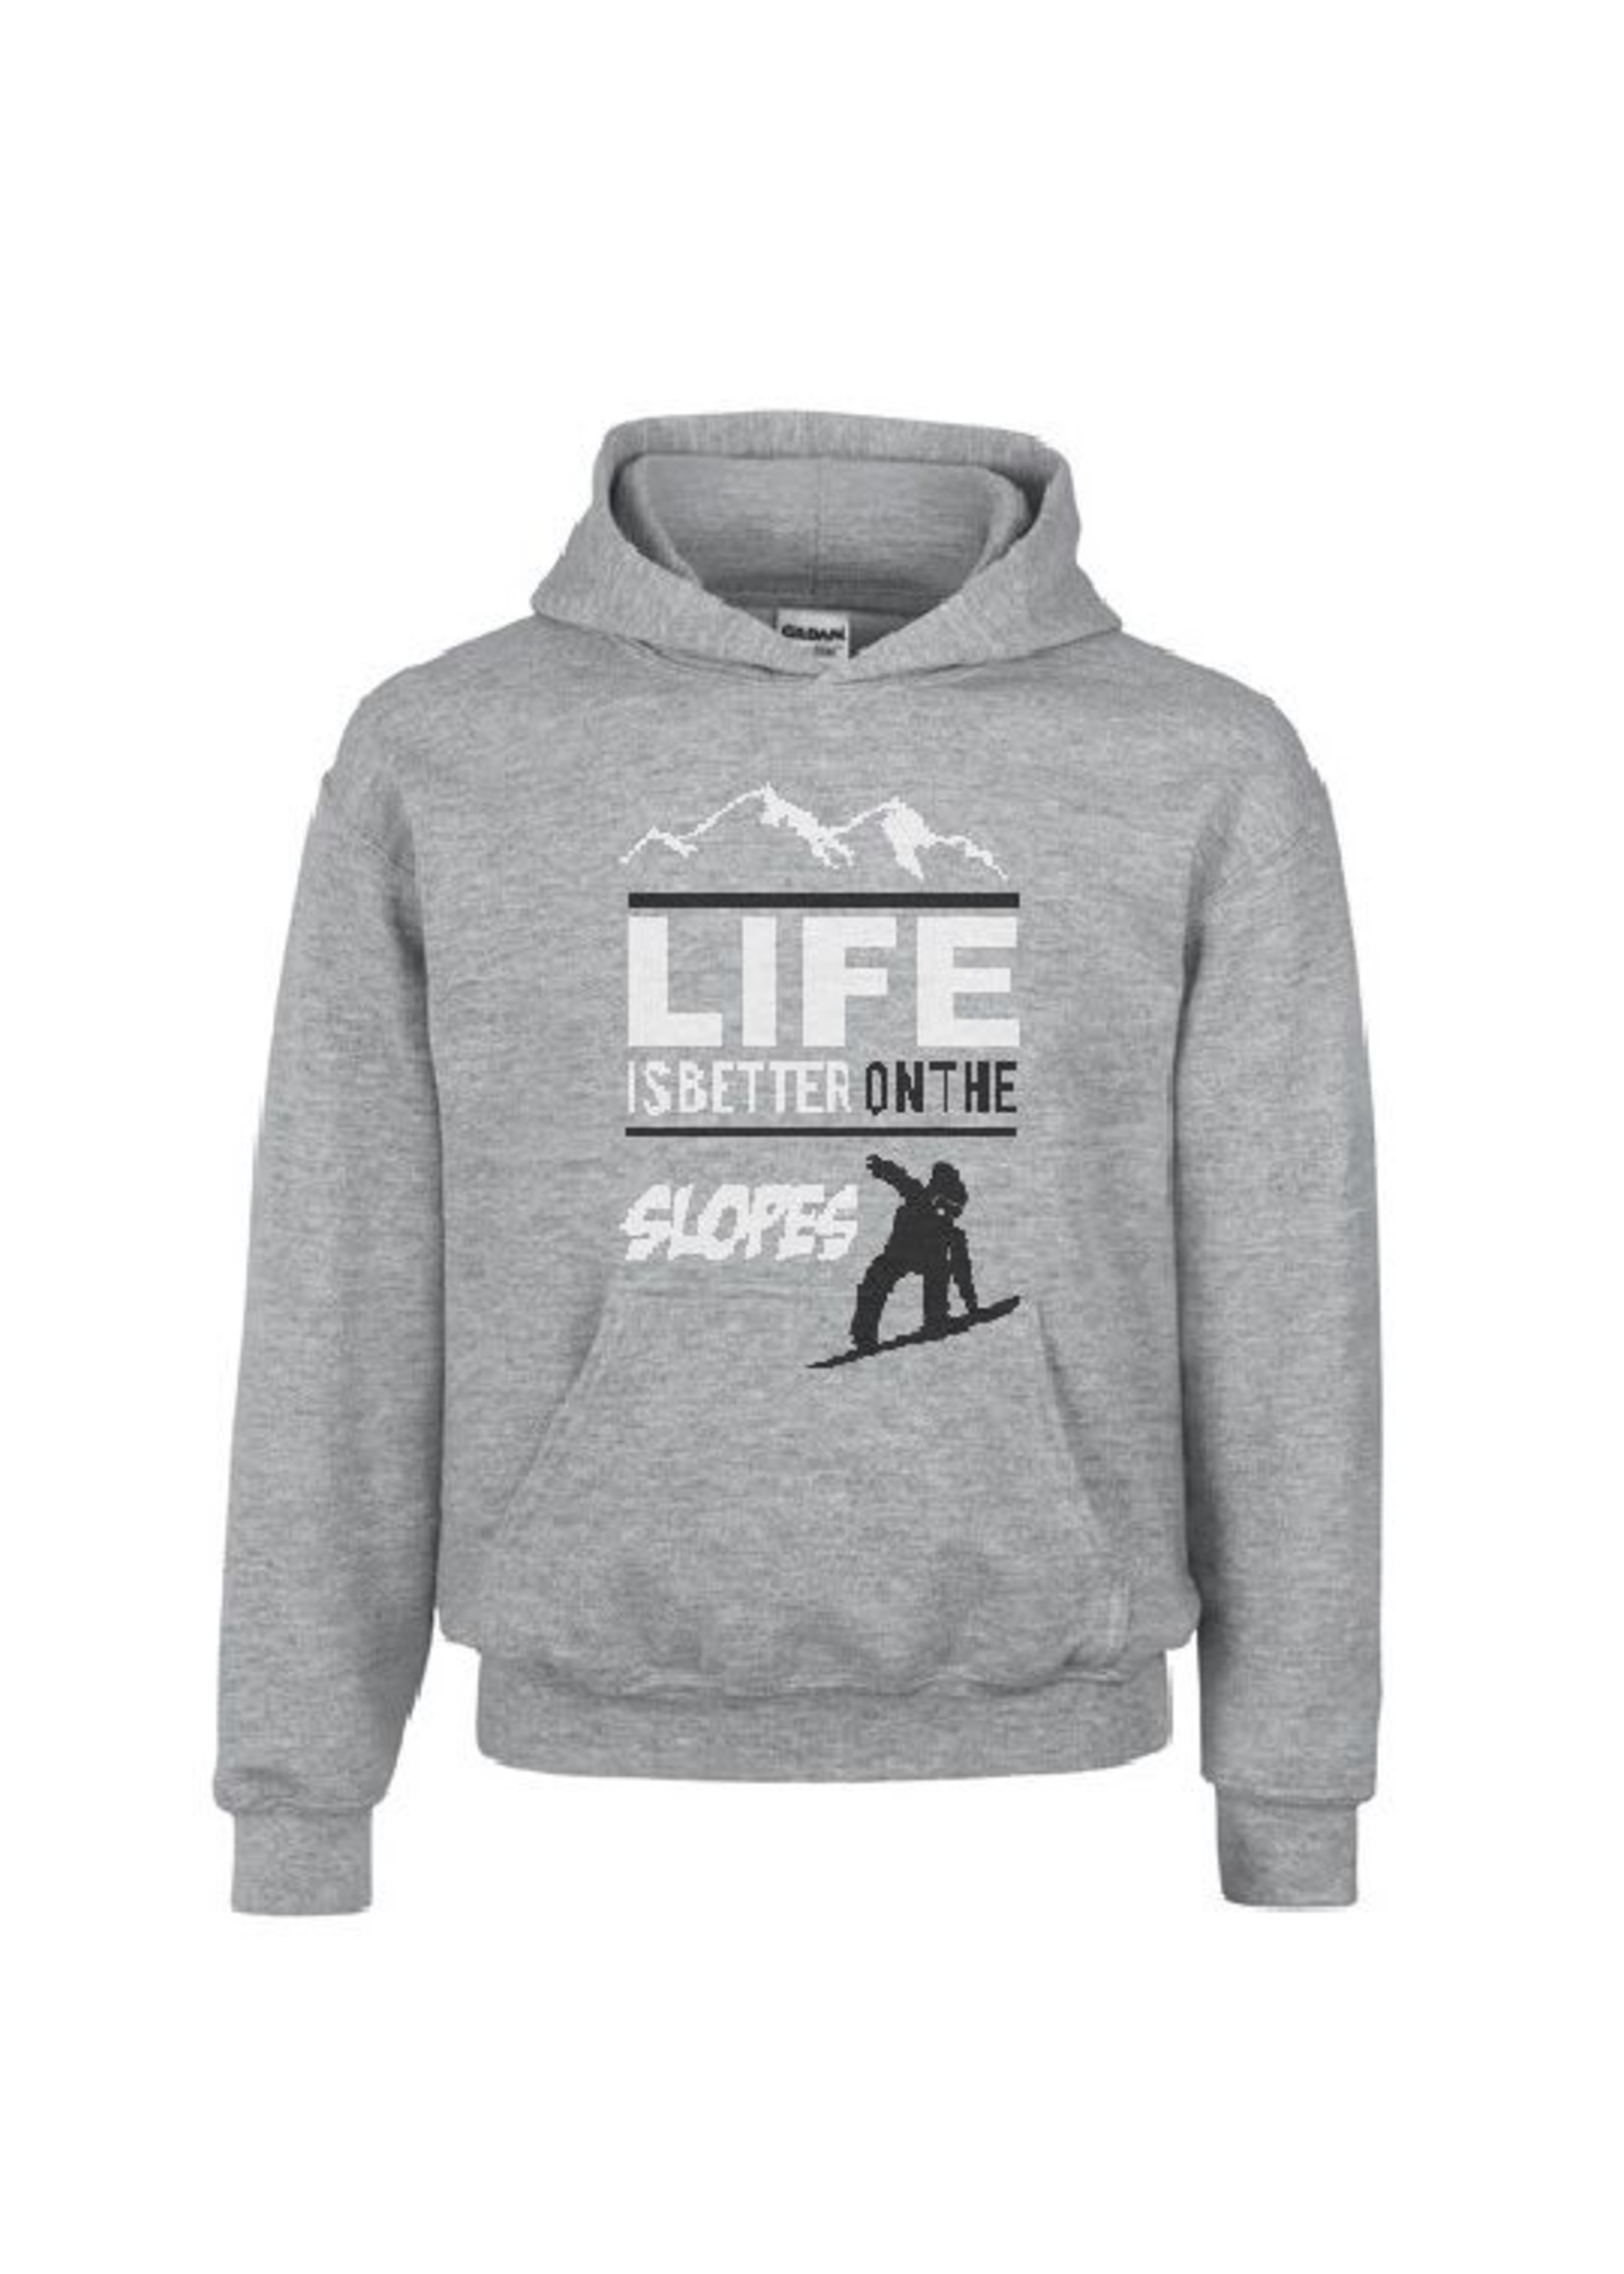 Snowboard hoodie - Life is better on the slopes